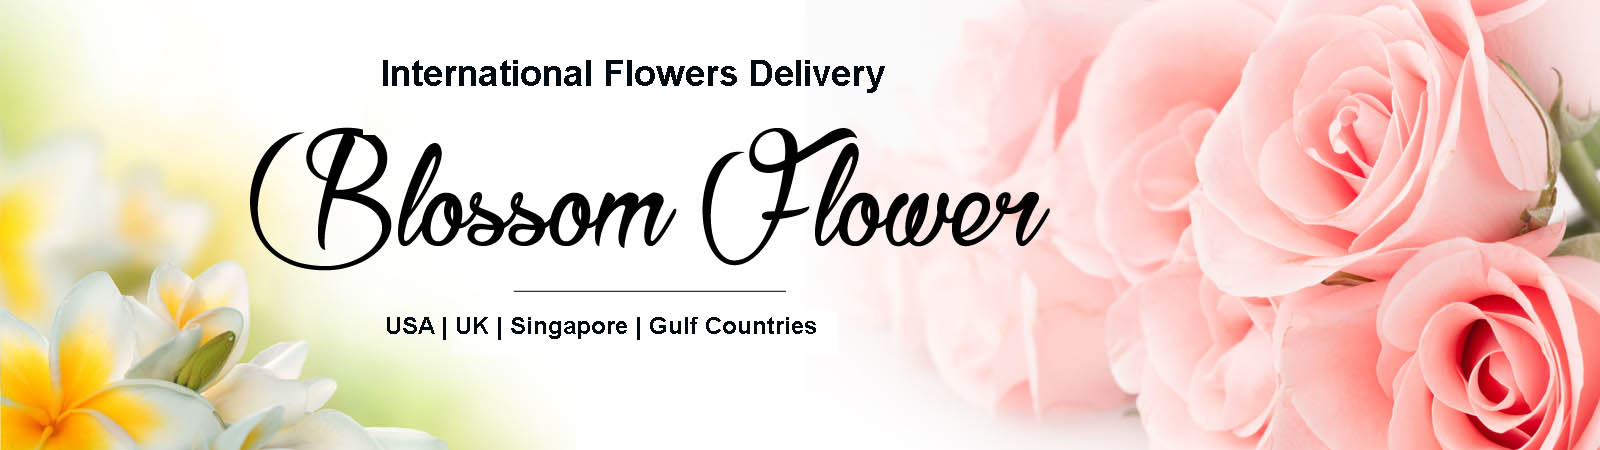 International Flowers Delivery